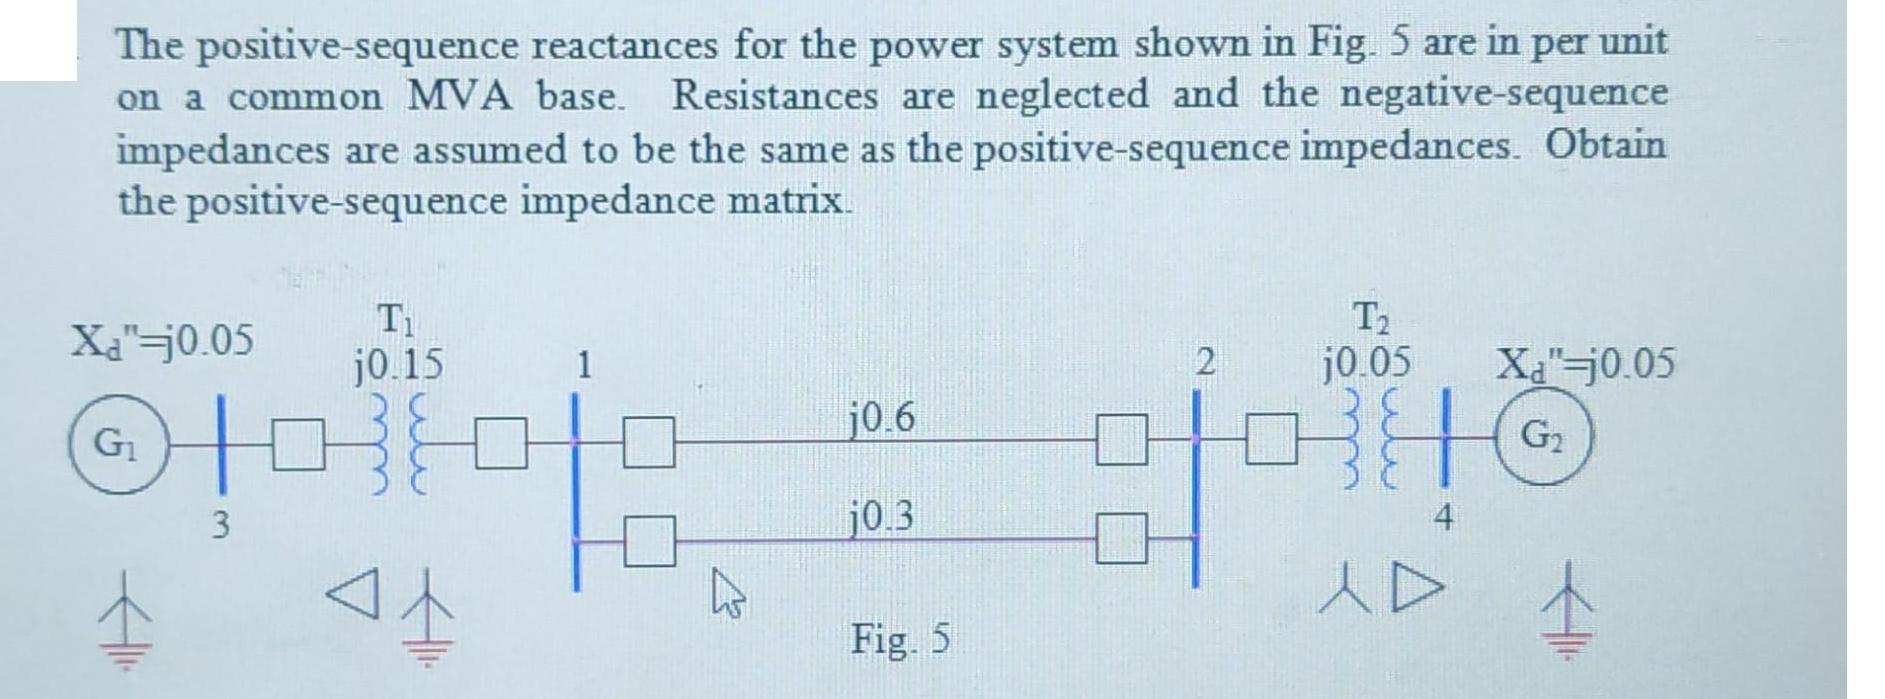 The positive-sequence reactances for the power system shown in Fig. 5 are in per unit on a common MVA base.